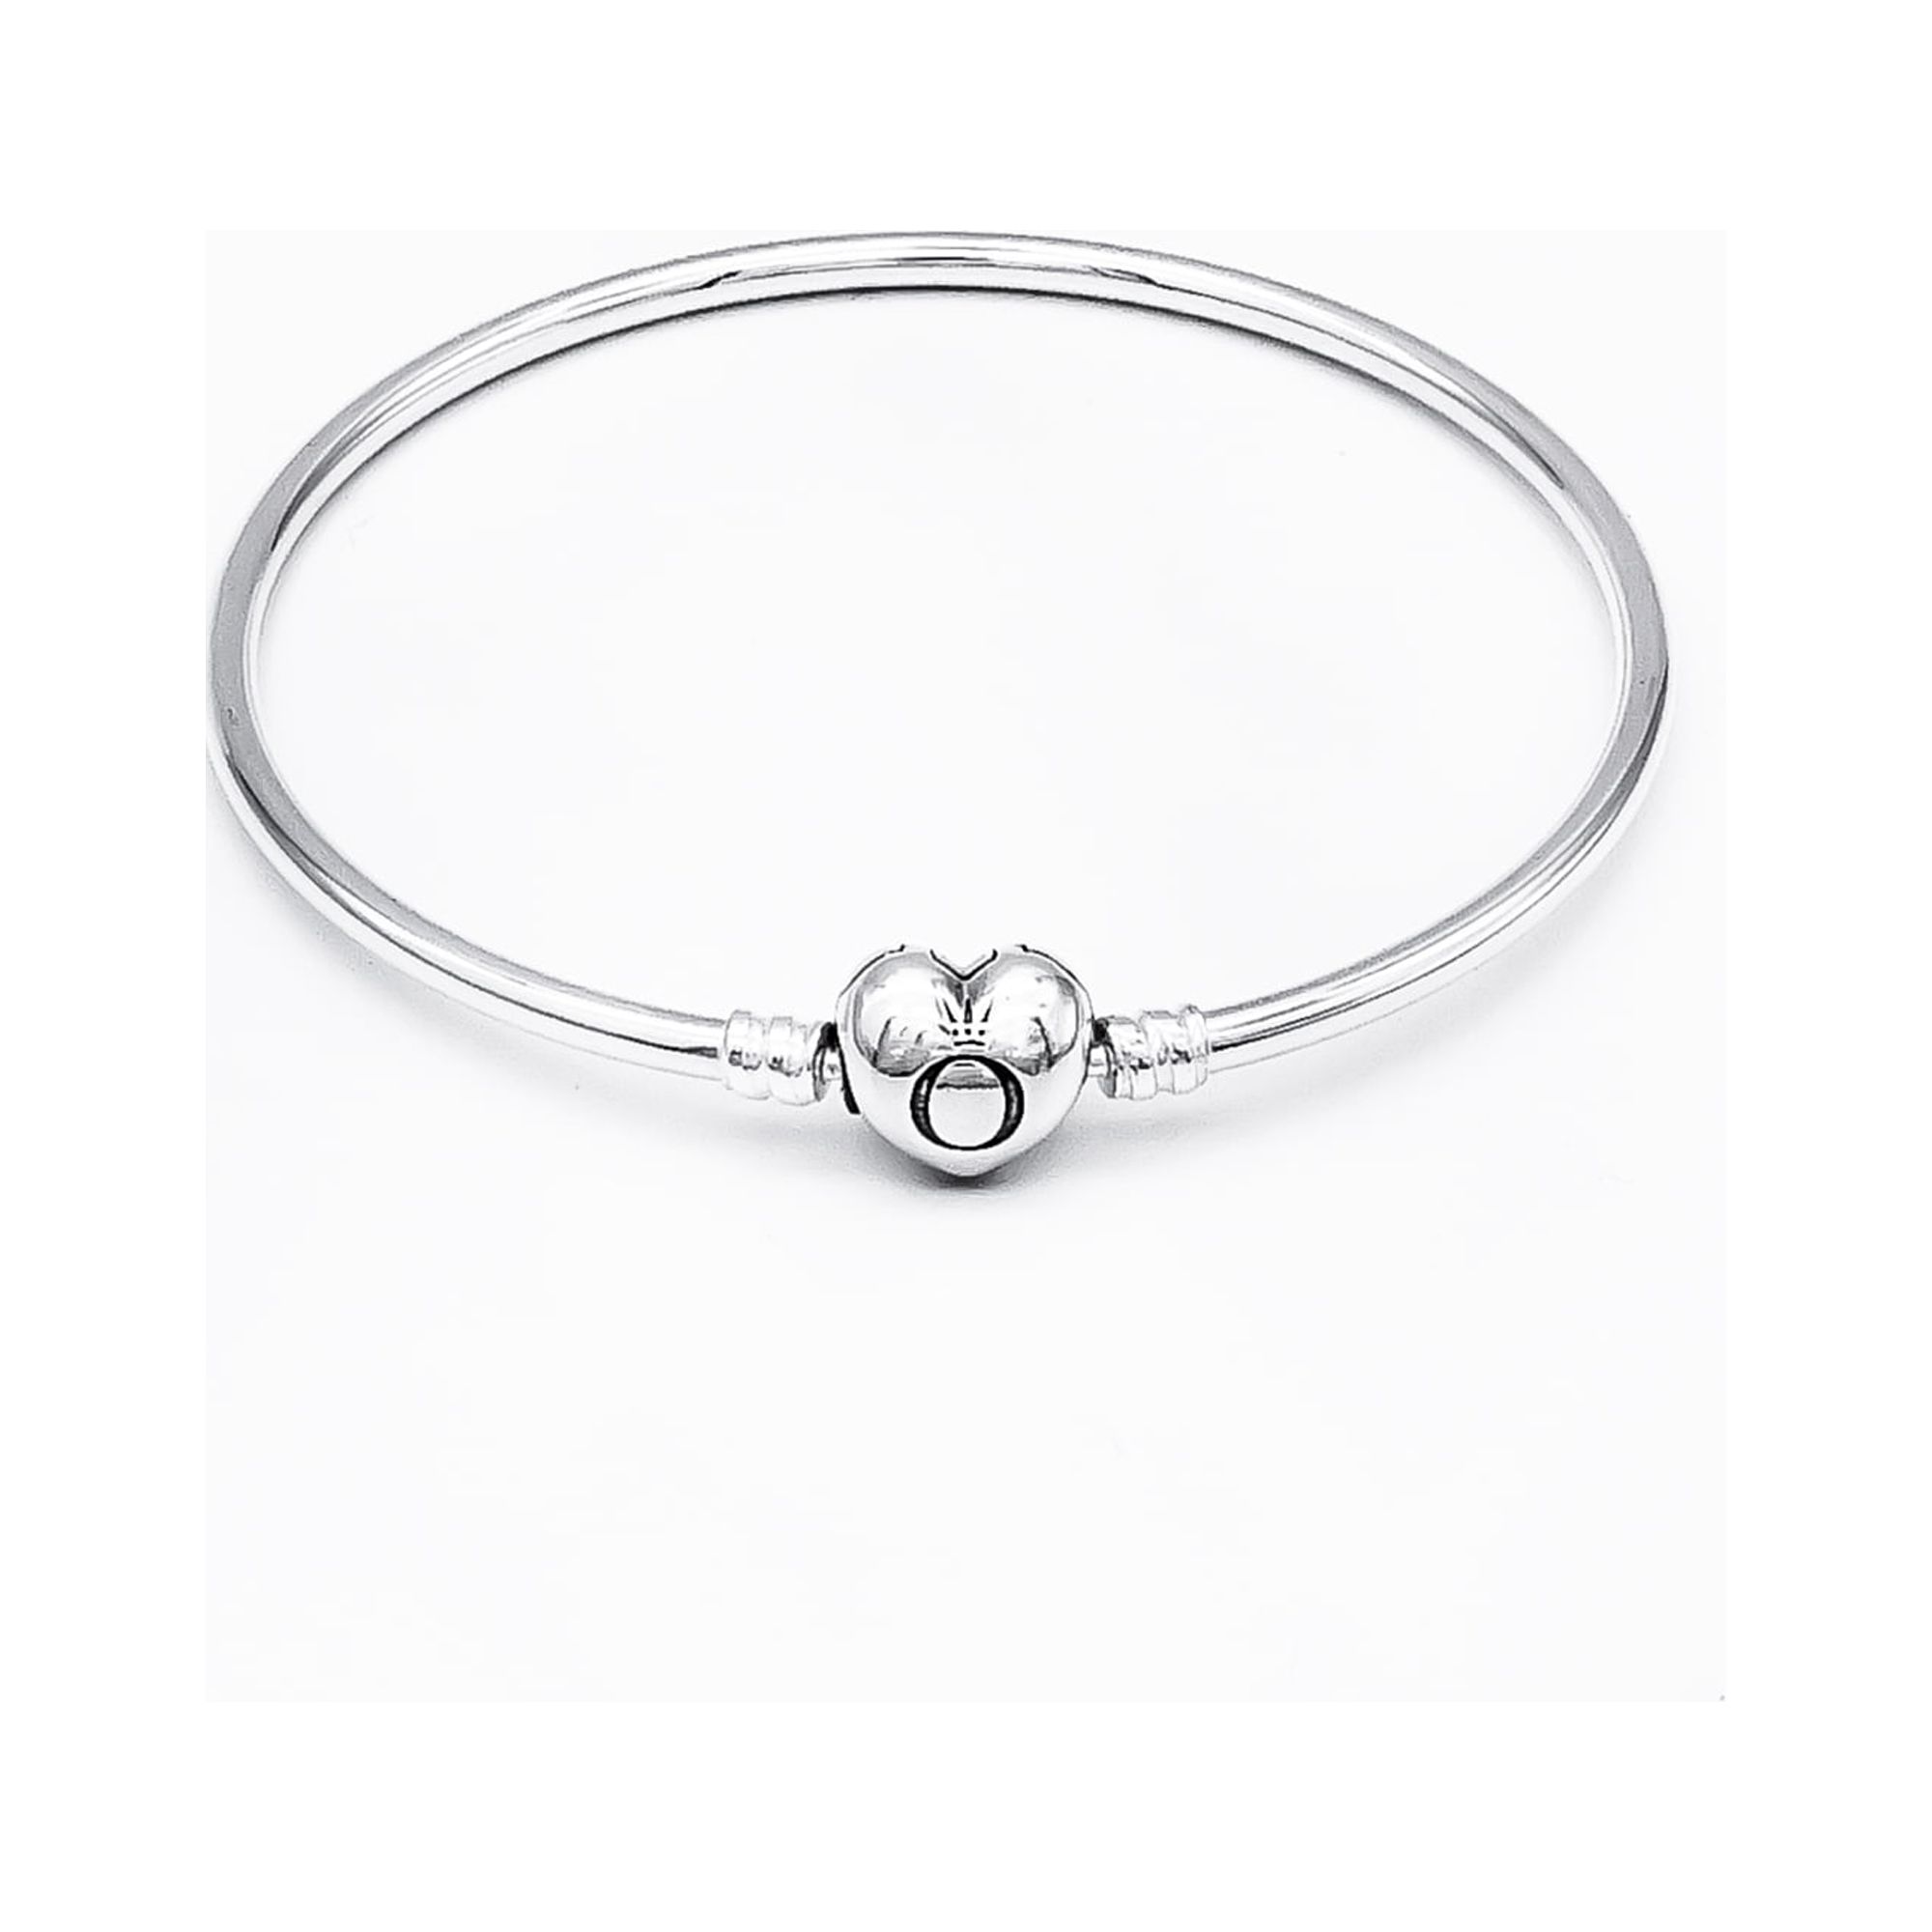 Pandora Moments Sterling Silver Bangle with Heart Clasp - image 1 of 2